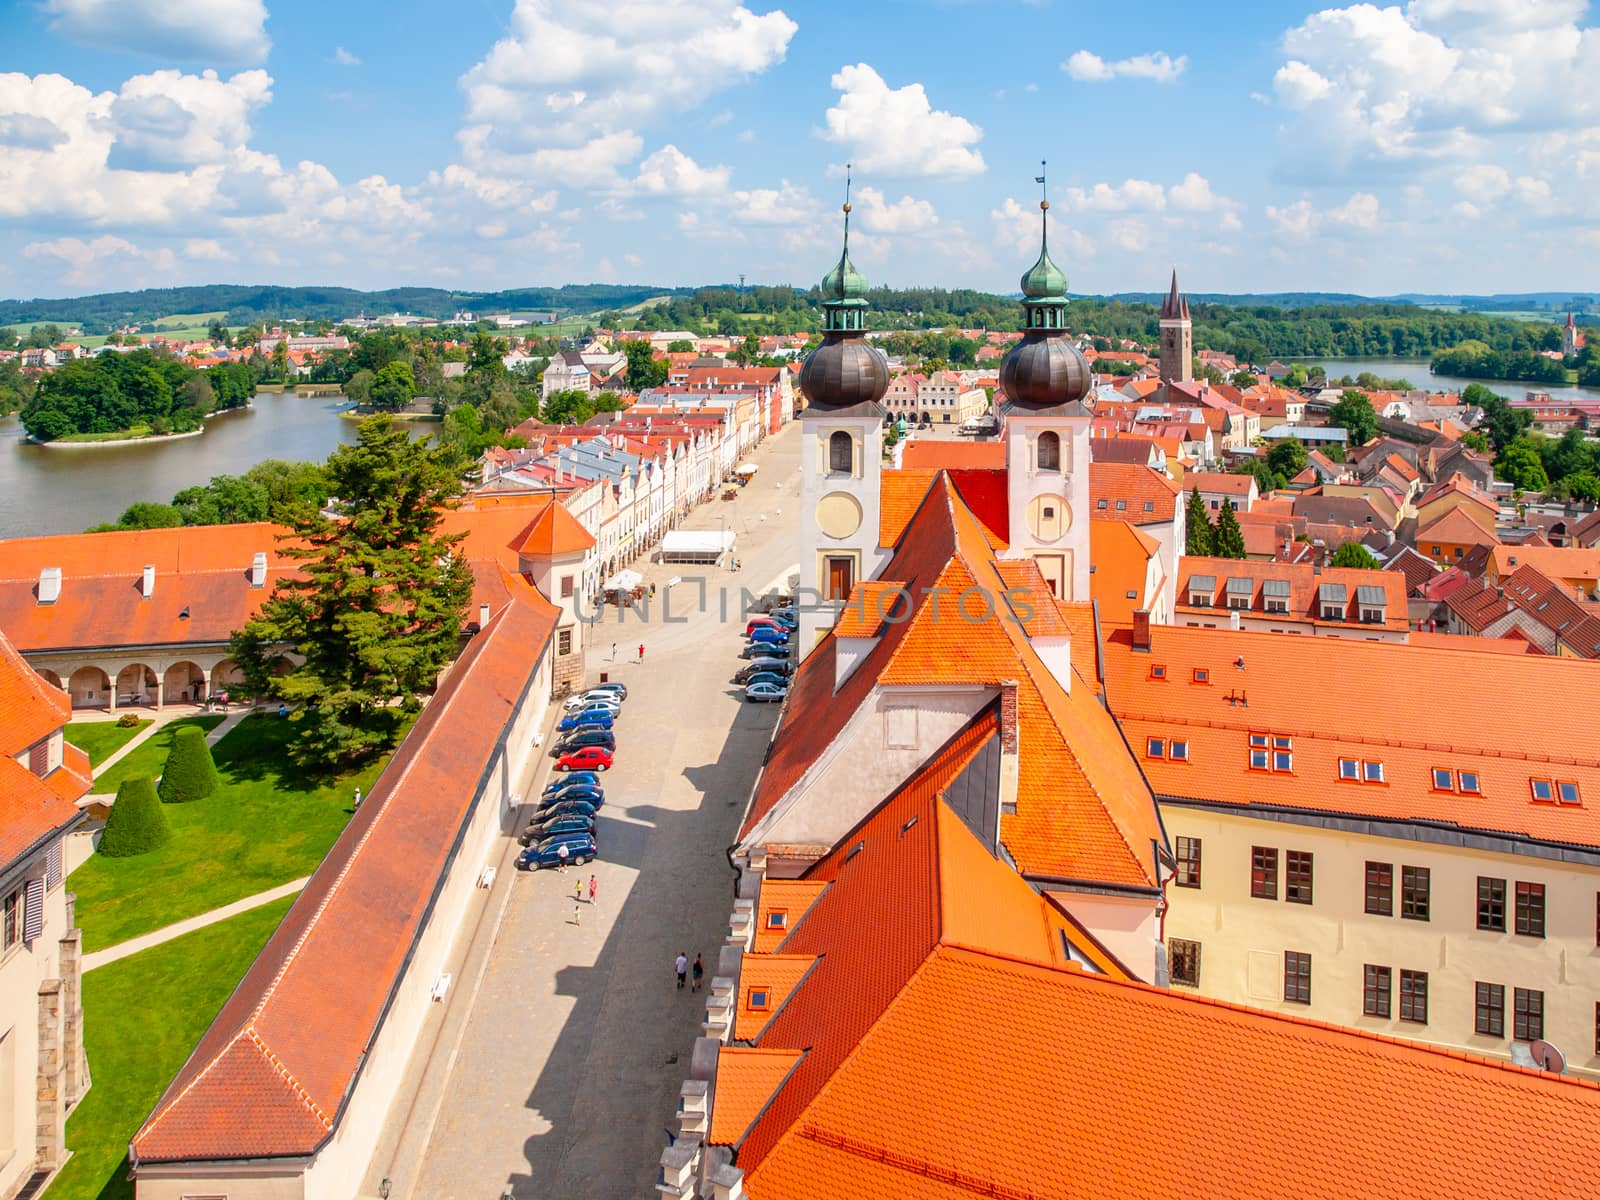 Aerial view of Telc with main square and towers of church of the Holy Name of Jesus, Czech Republic. UNESCO World Heritage Site.